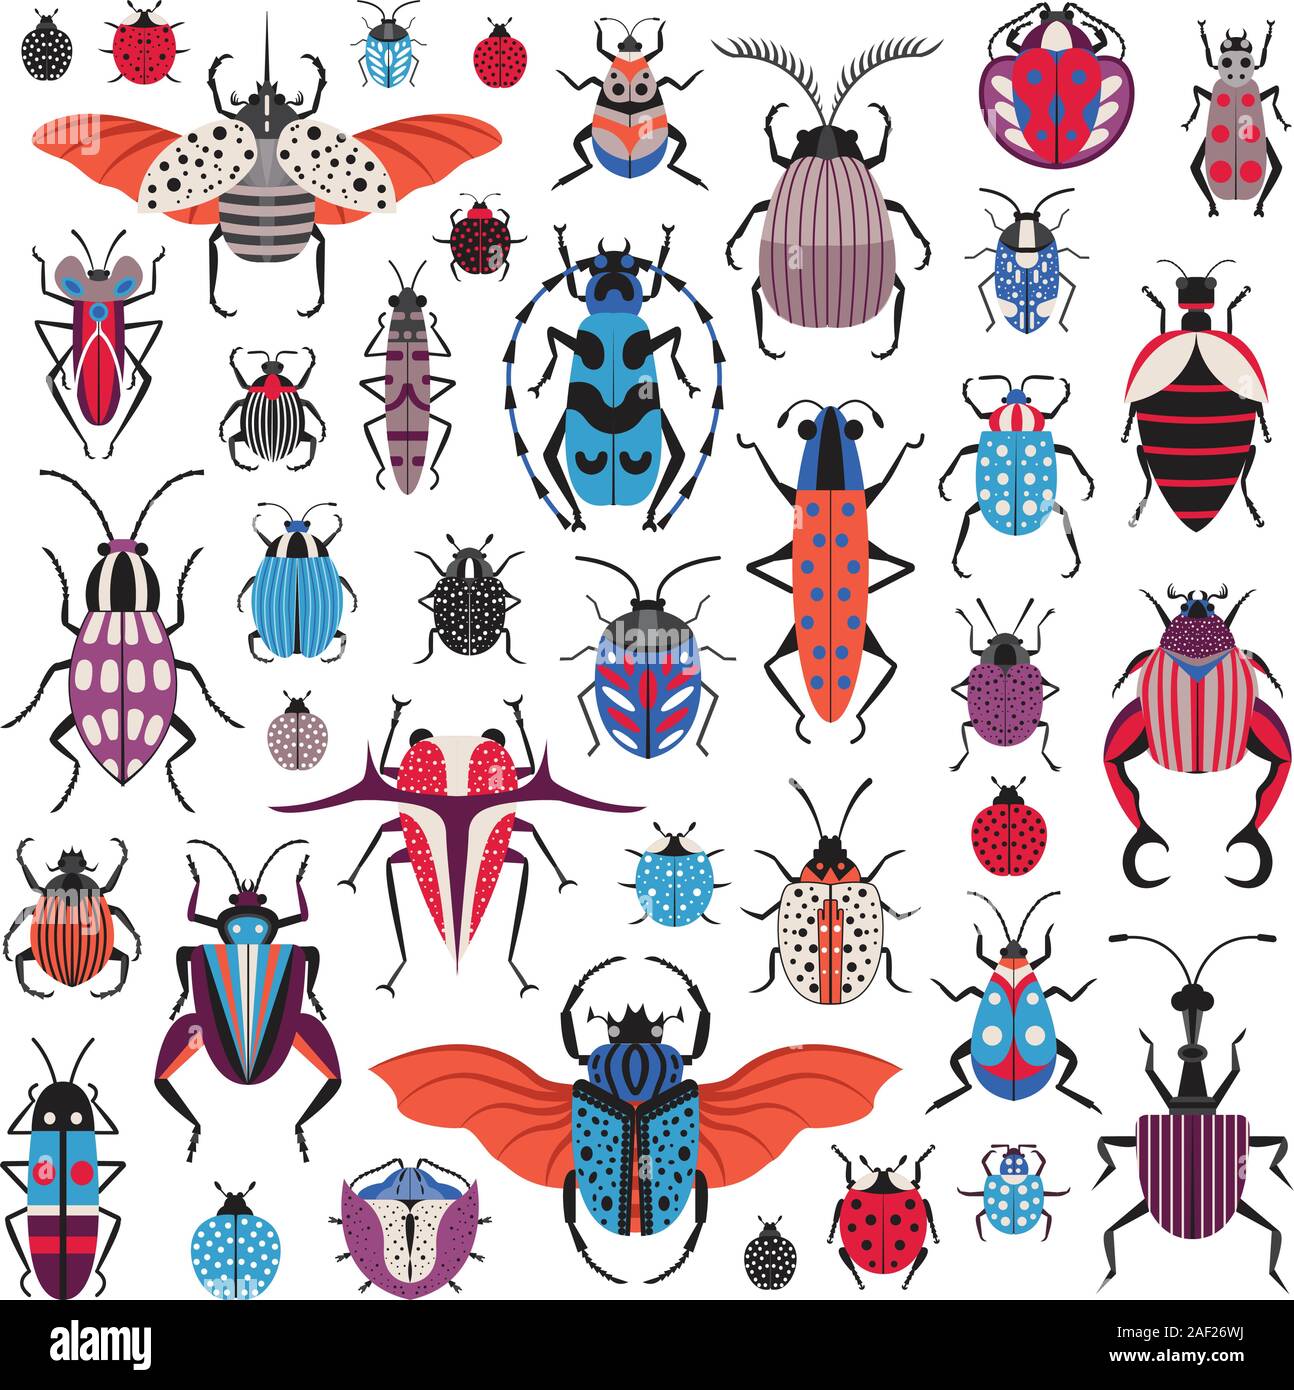 Unusual Bugs and Weird Beetle Species Icons Stock Vector